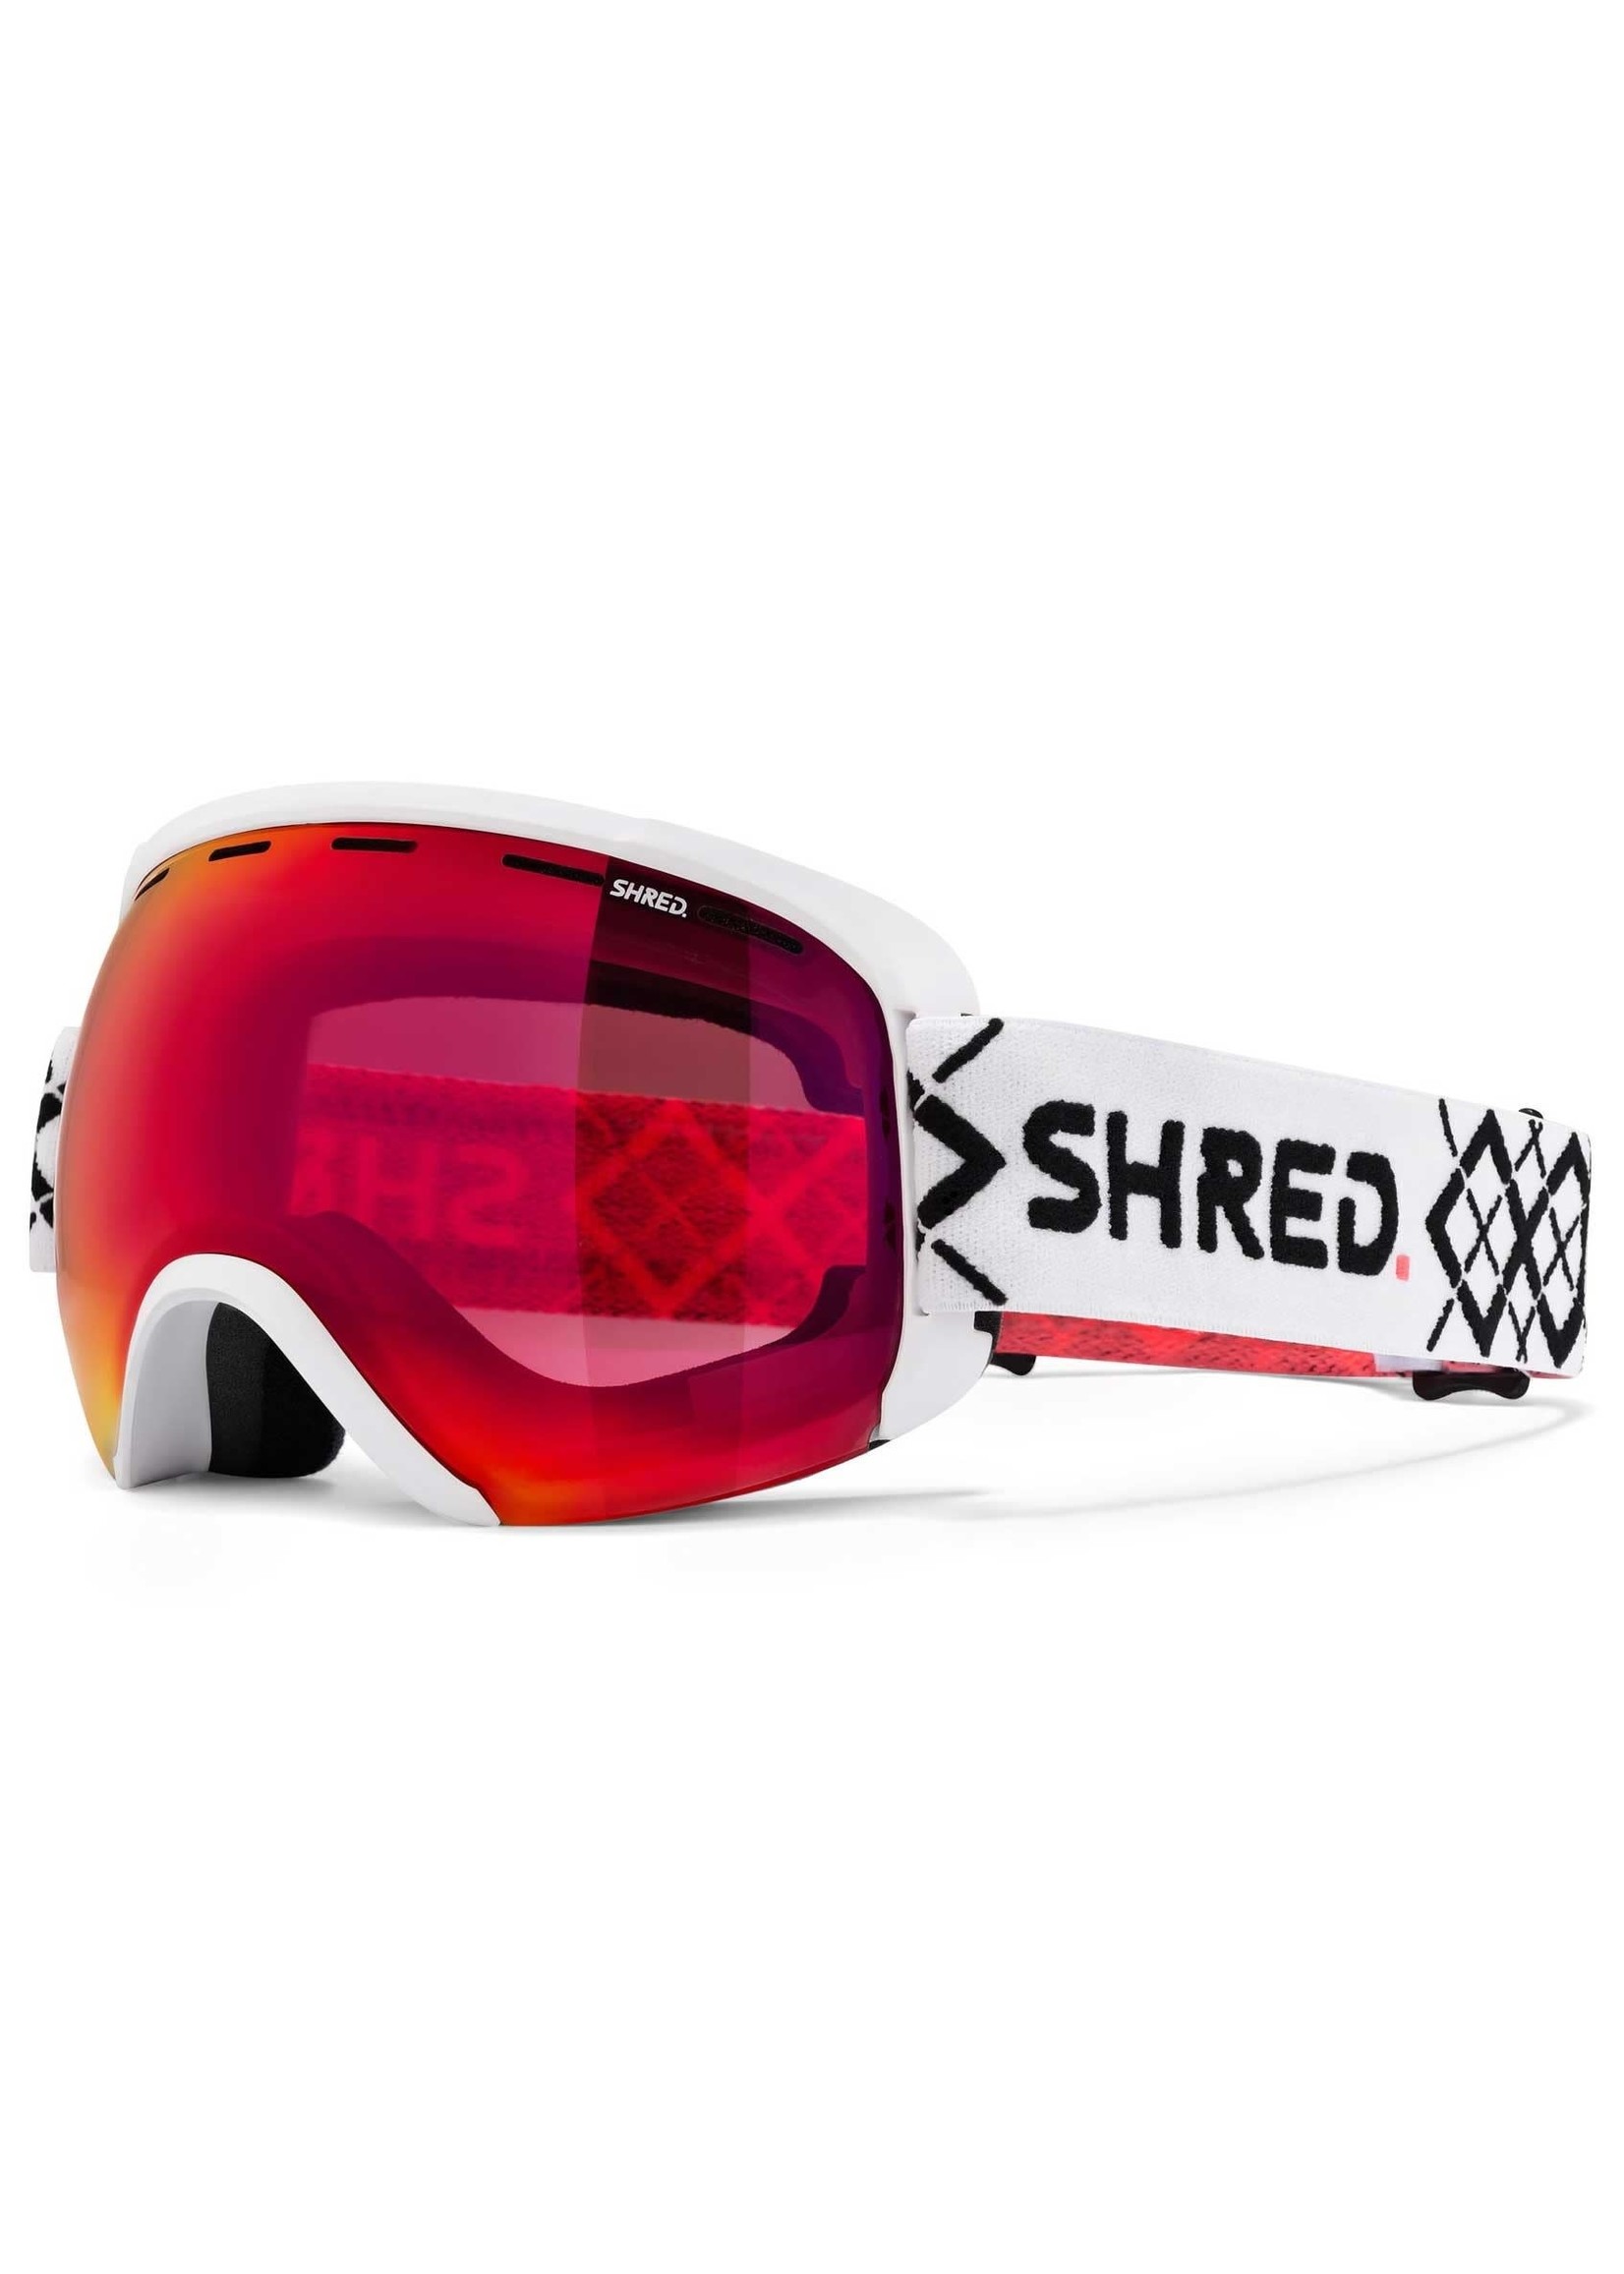 Shred Shred Exemplify Goggles